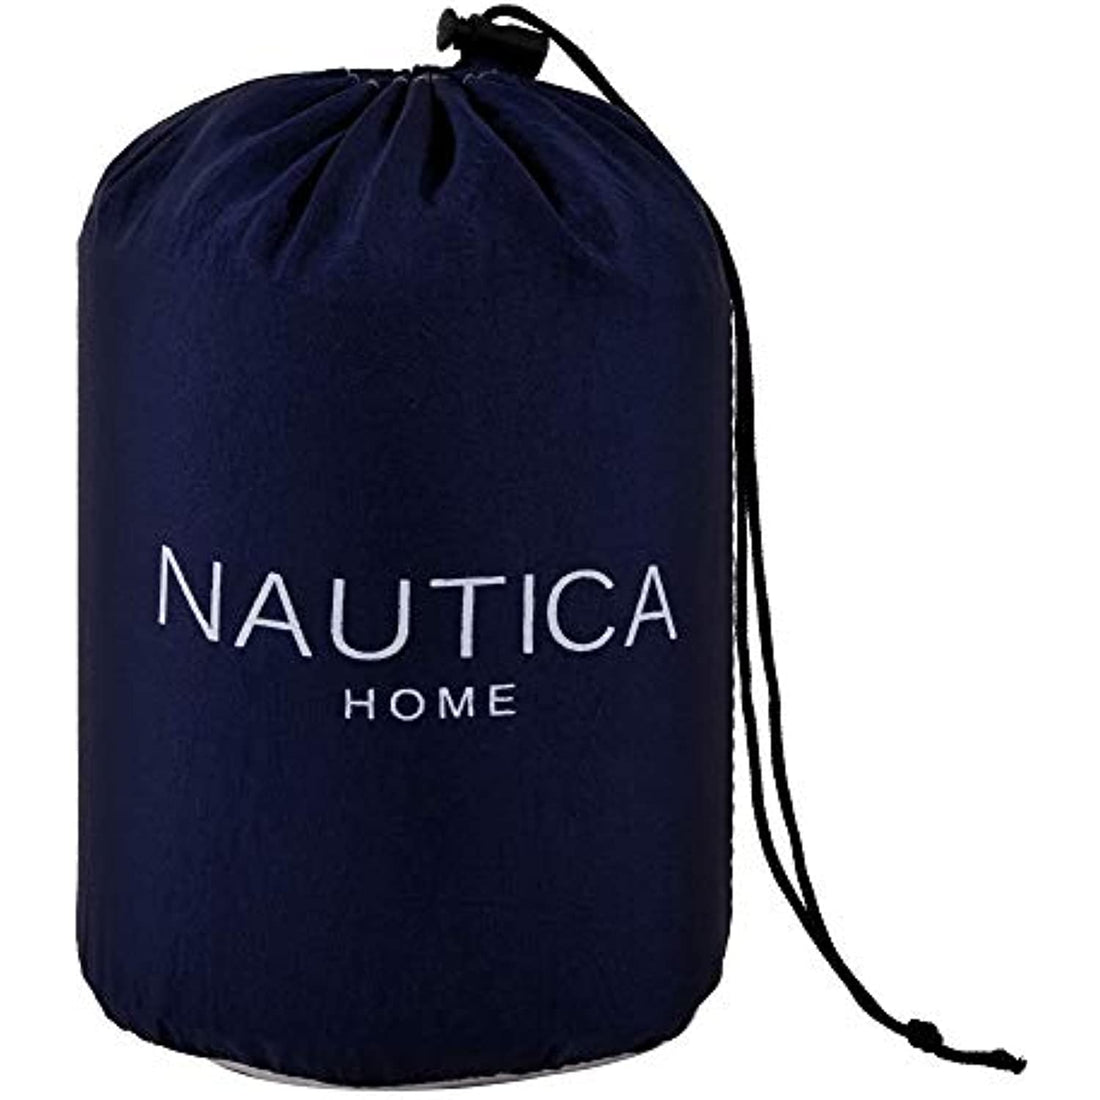 Nautica Portable Camping Hammock 1-2Person Kids or Adults with Straps, Caribiners & Bag for Travel/Backpacking/Hiking/Backyard/Lawn, Maritime Blue/High Rise Grey, Large